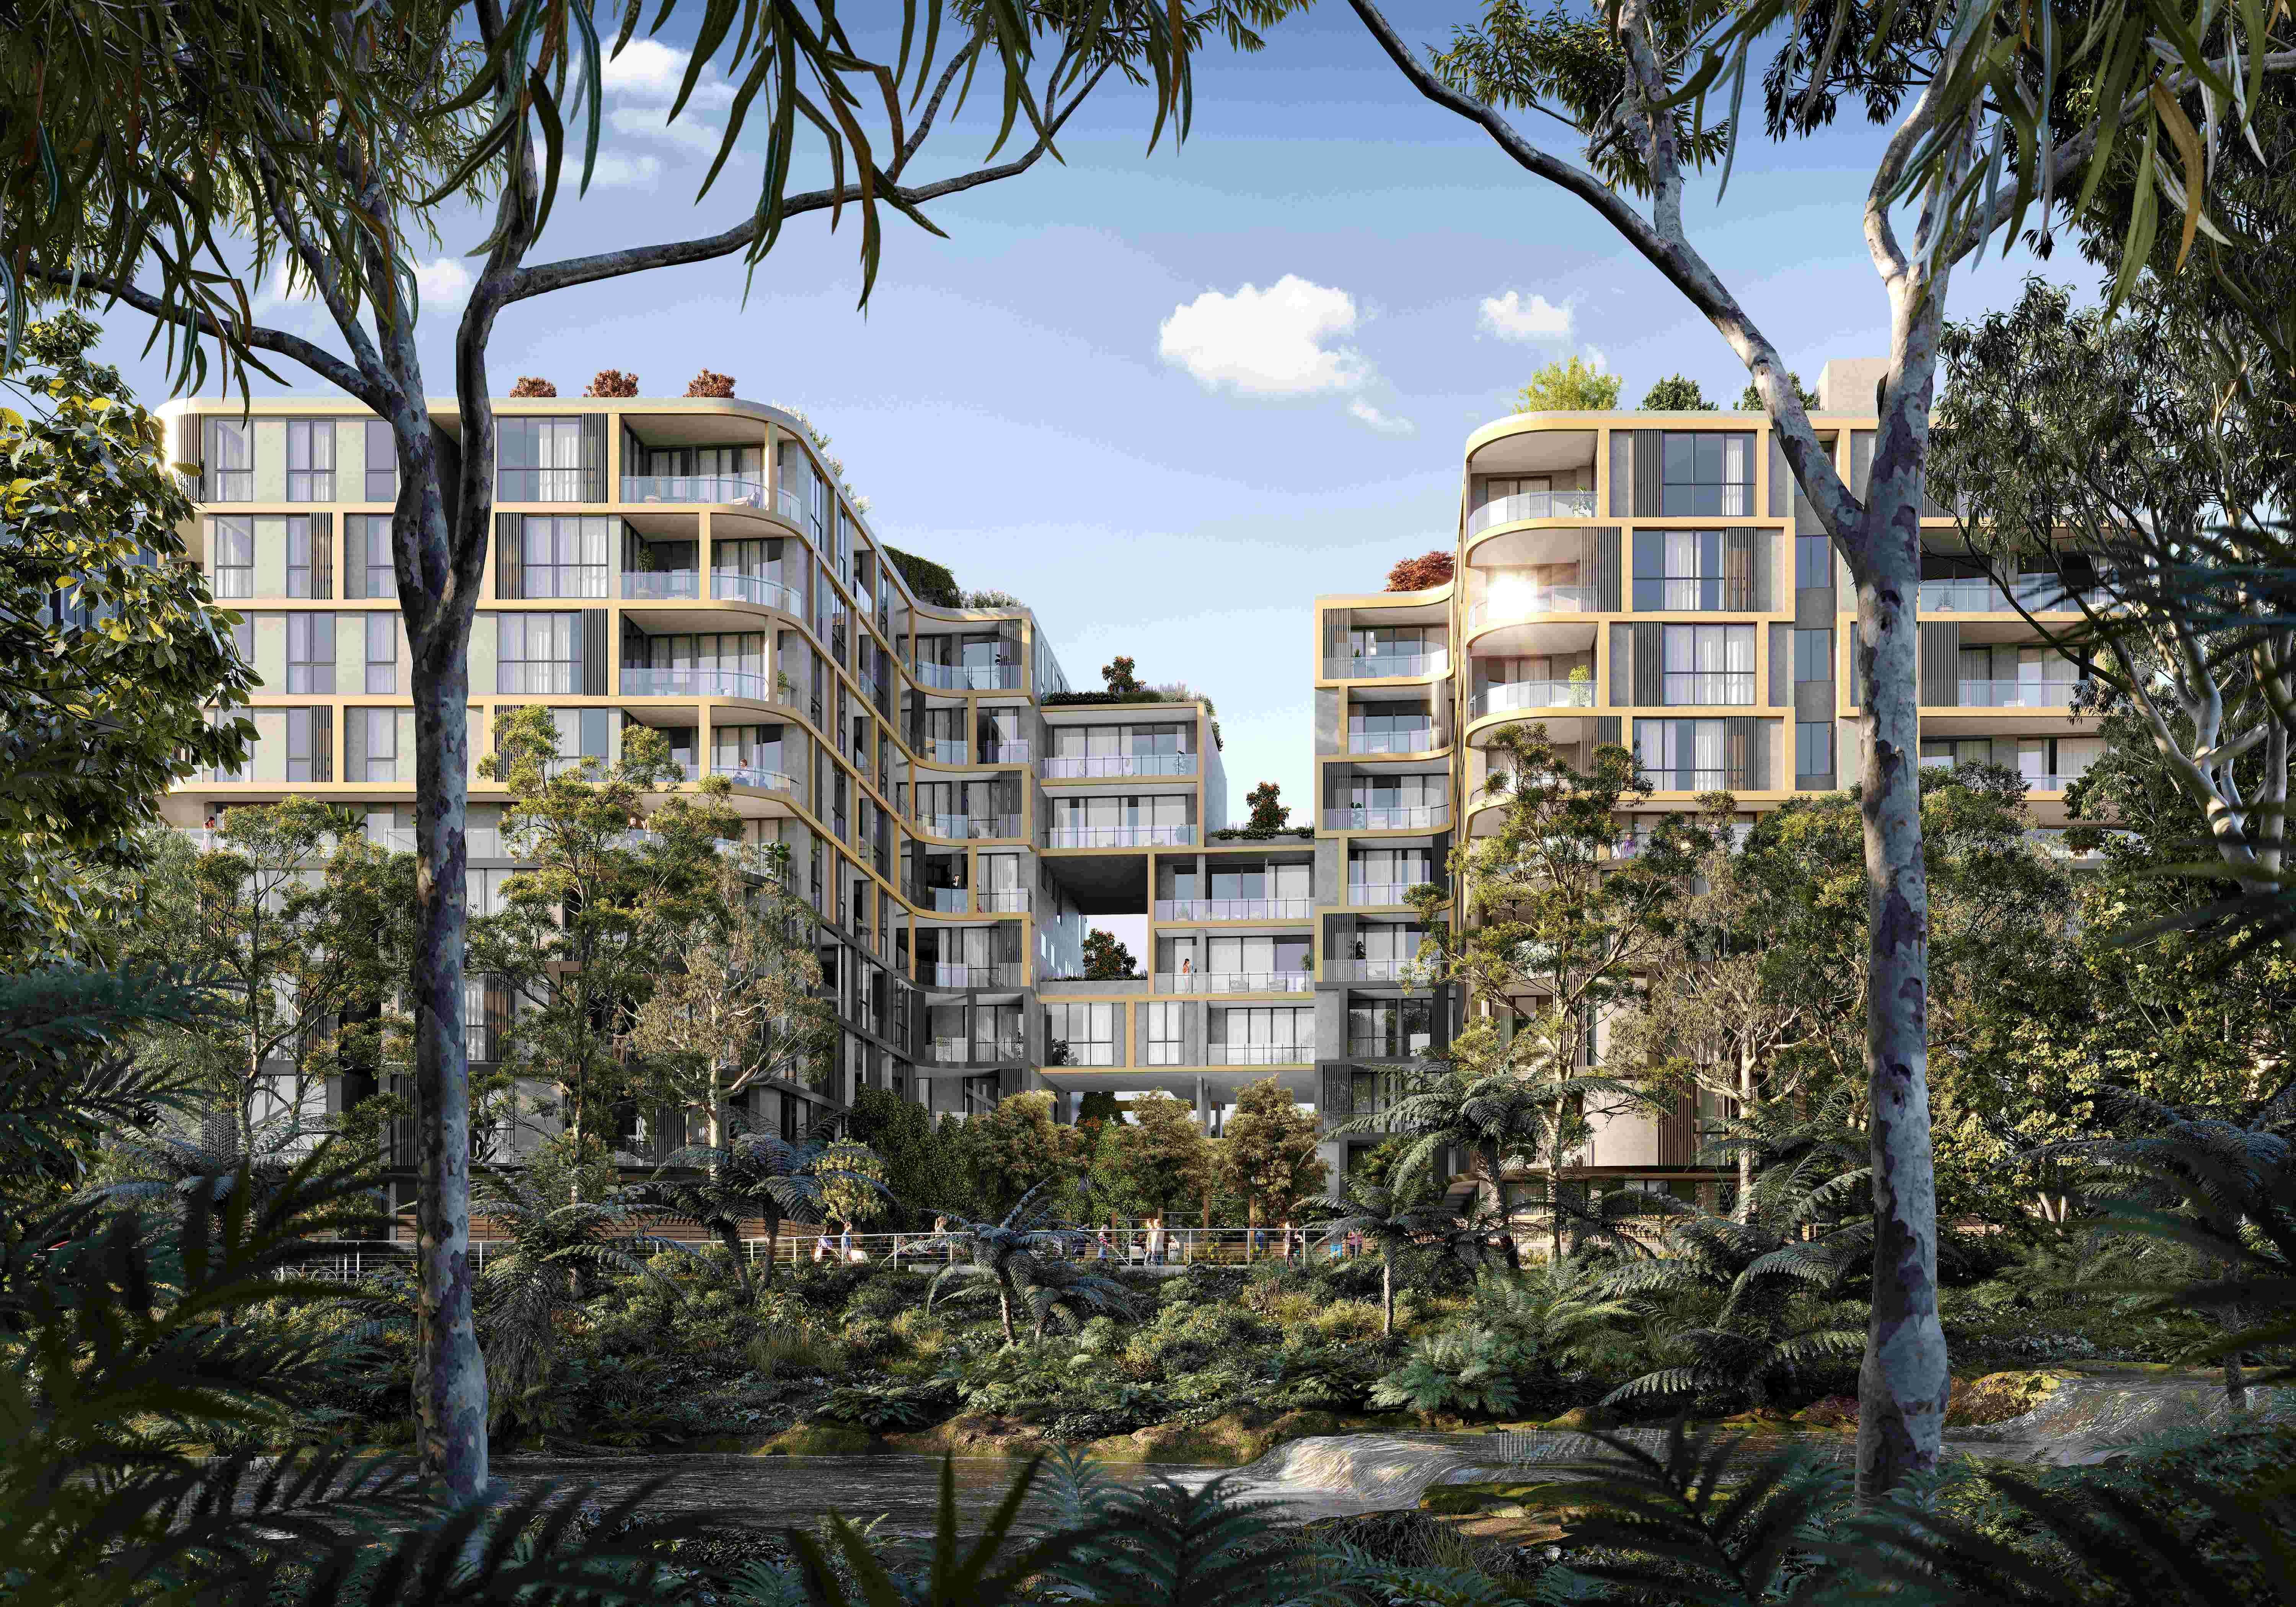 Ellipse Property Group readies for construction after $850m Carrington Place wins approval